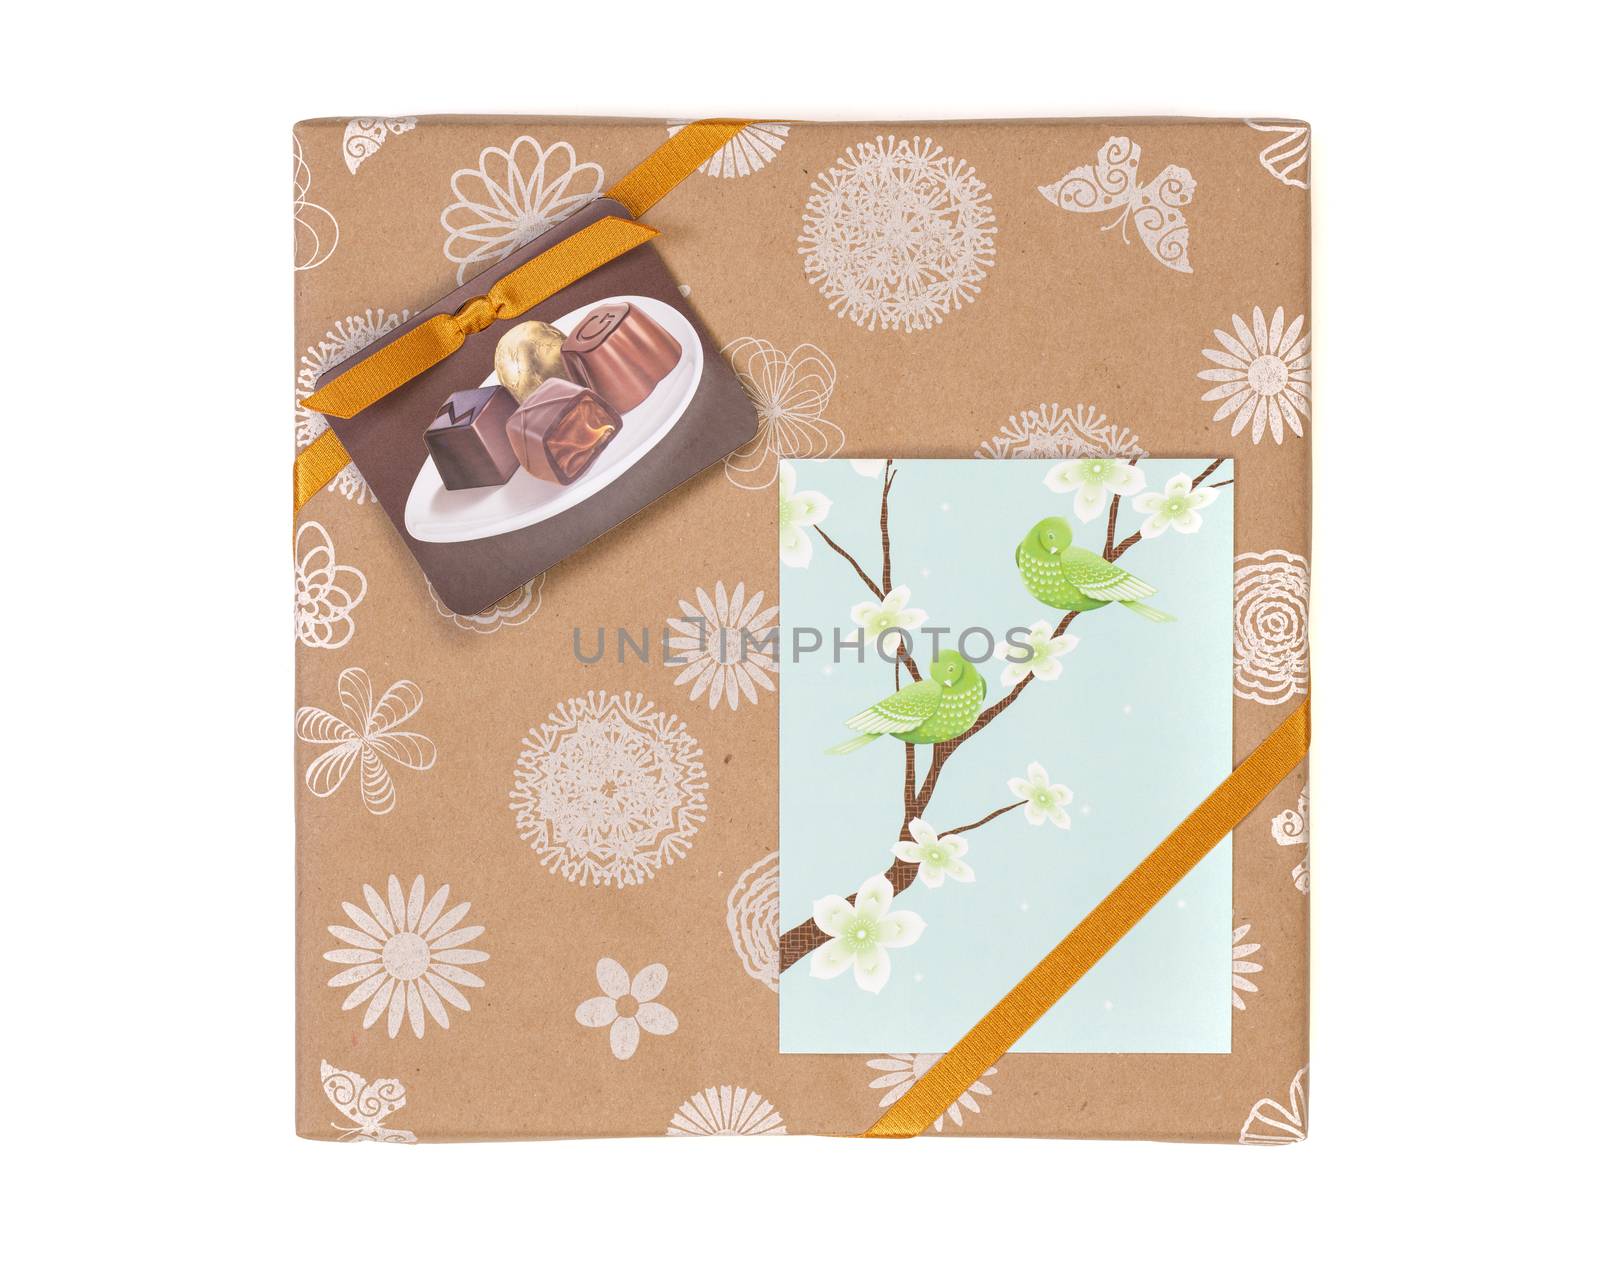 Gift wrapped box with chocolate candies and golden tape on a white background with greeting card.